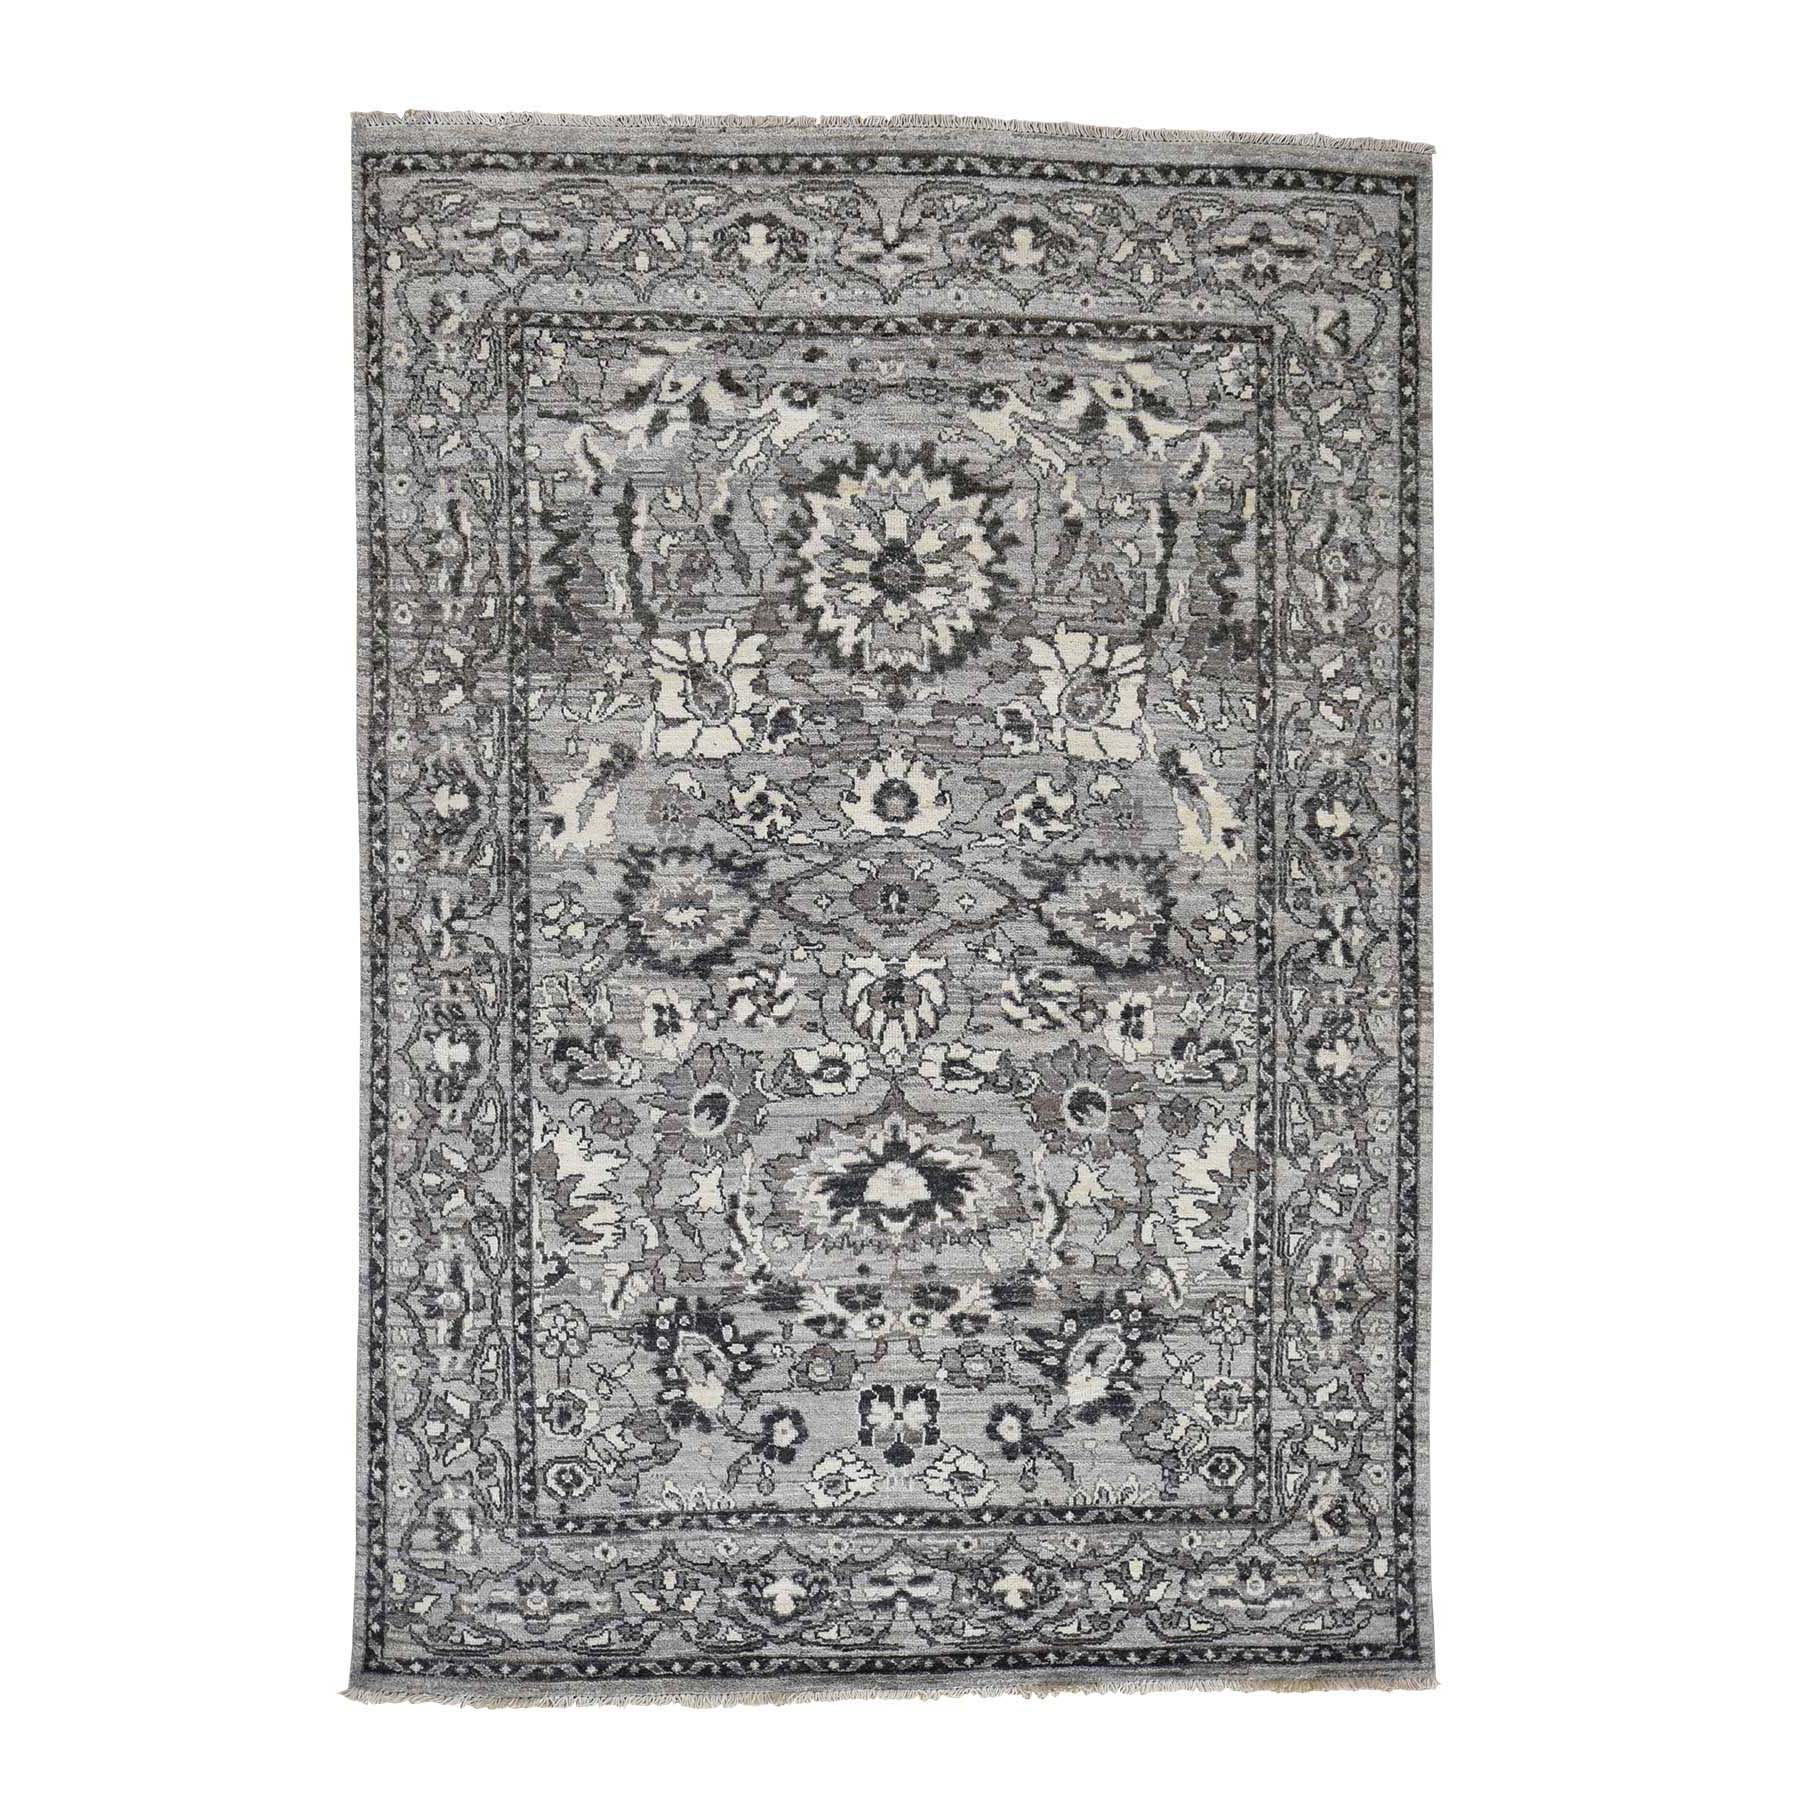 5'1"x7'2" Hand Woven Heriz with Natural Colors Oriental Rug 